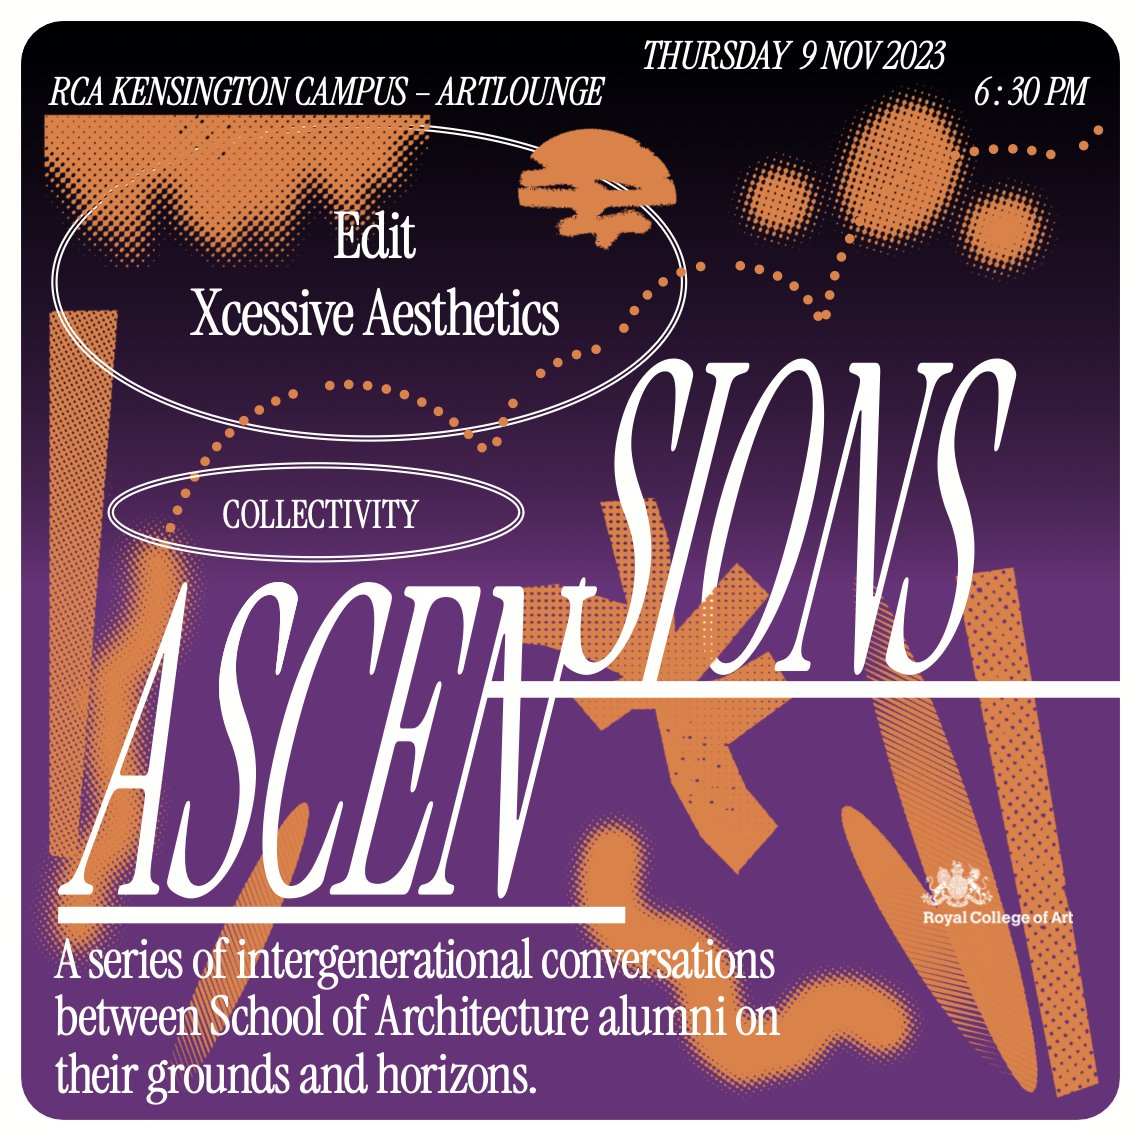 Ascensions 2 {Collectivity} Join @RCA School of Architecture in the ArtBar/Lounge, Kensington campus, on 9 November for Ascensions 2, the second event in the series of intergenerational conversations between School of Architecture alumni. RSVP: tinyurl.com/26229pe3